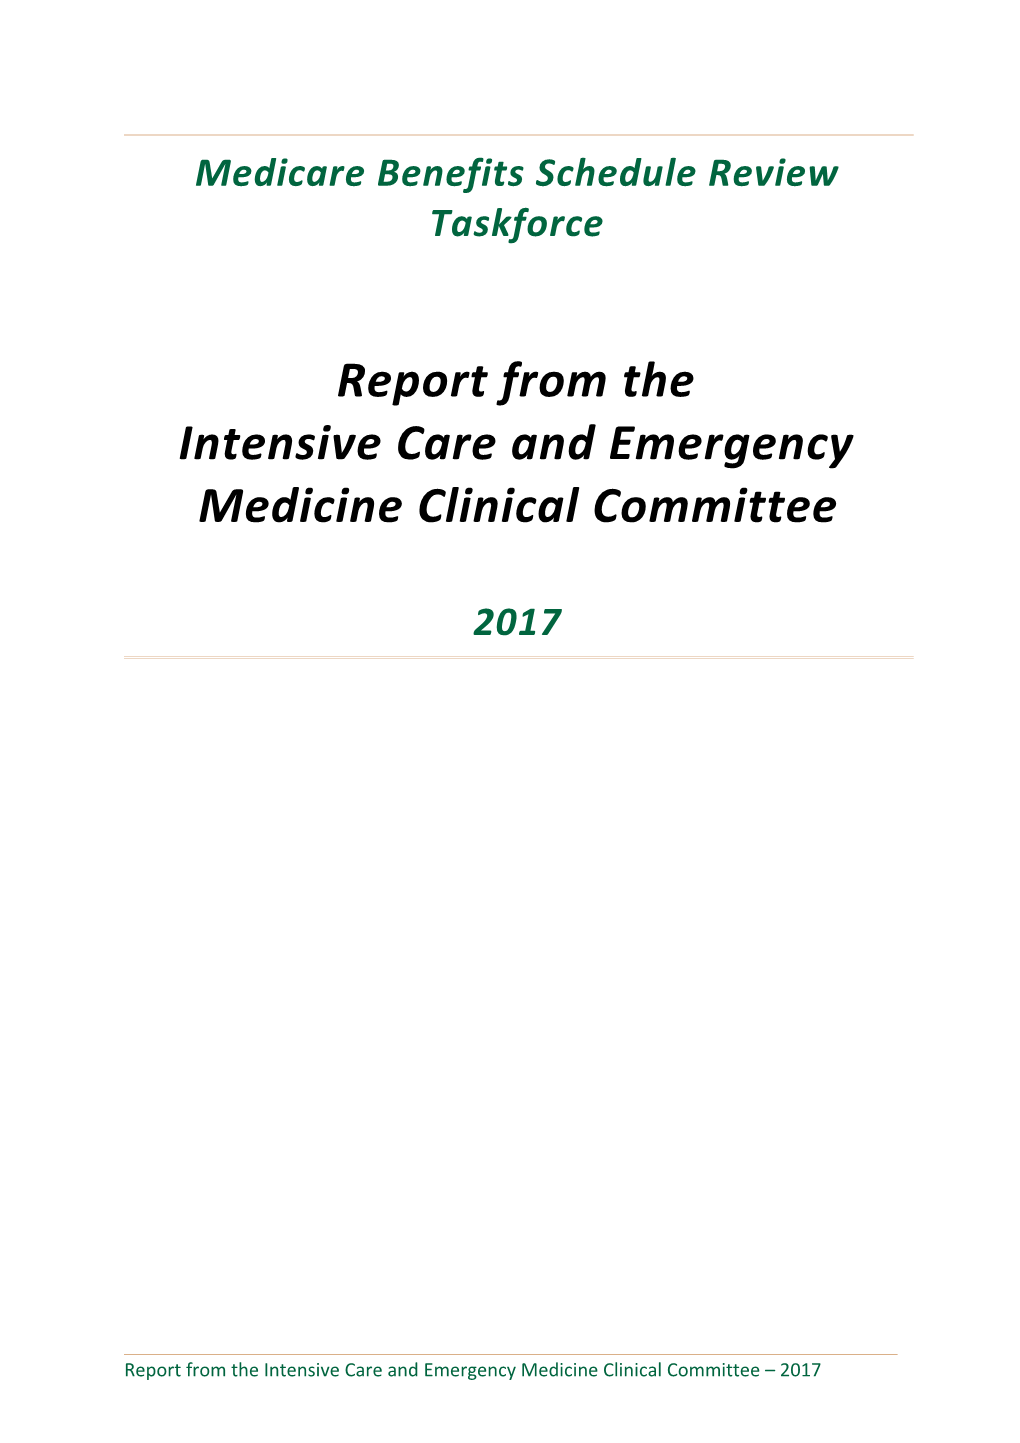 Report from the Intensive Care and Emergency Medicine Clinical Committee